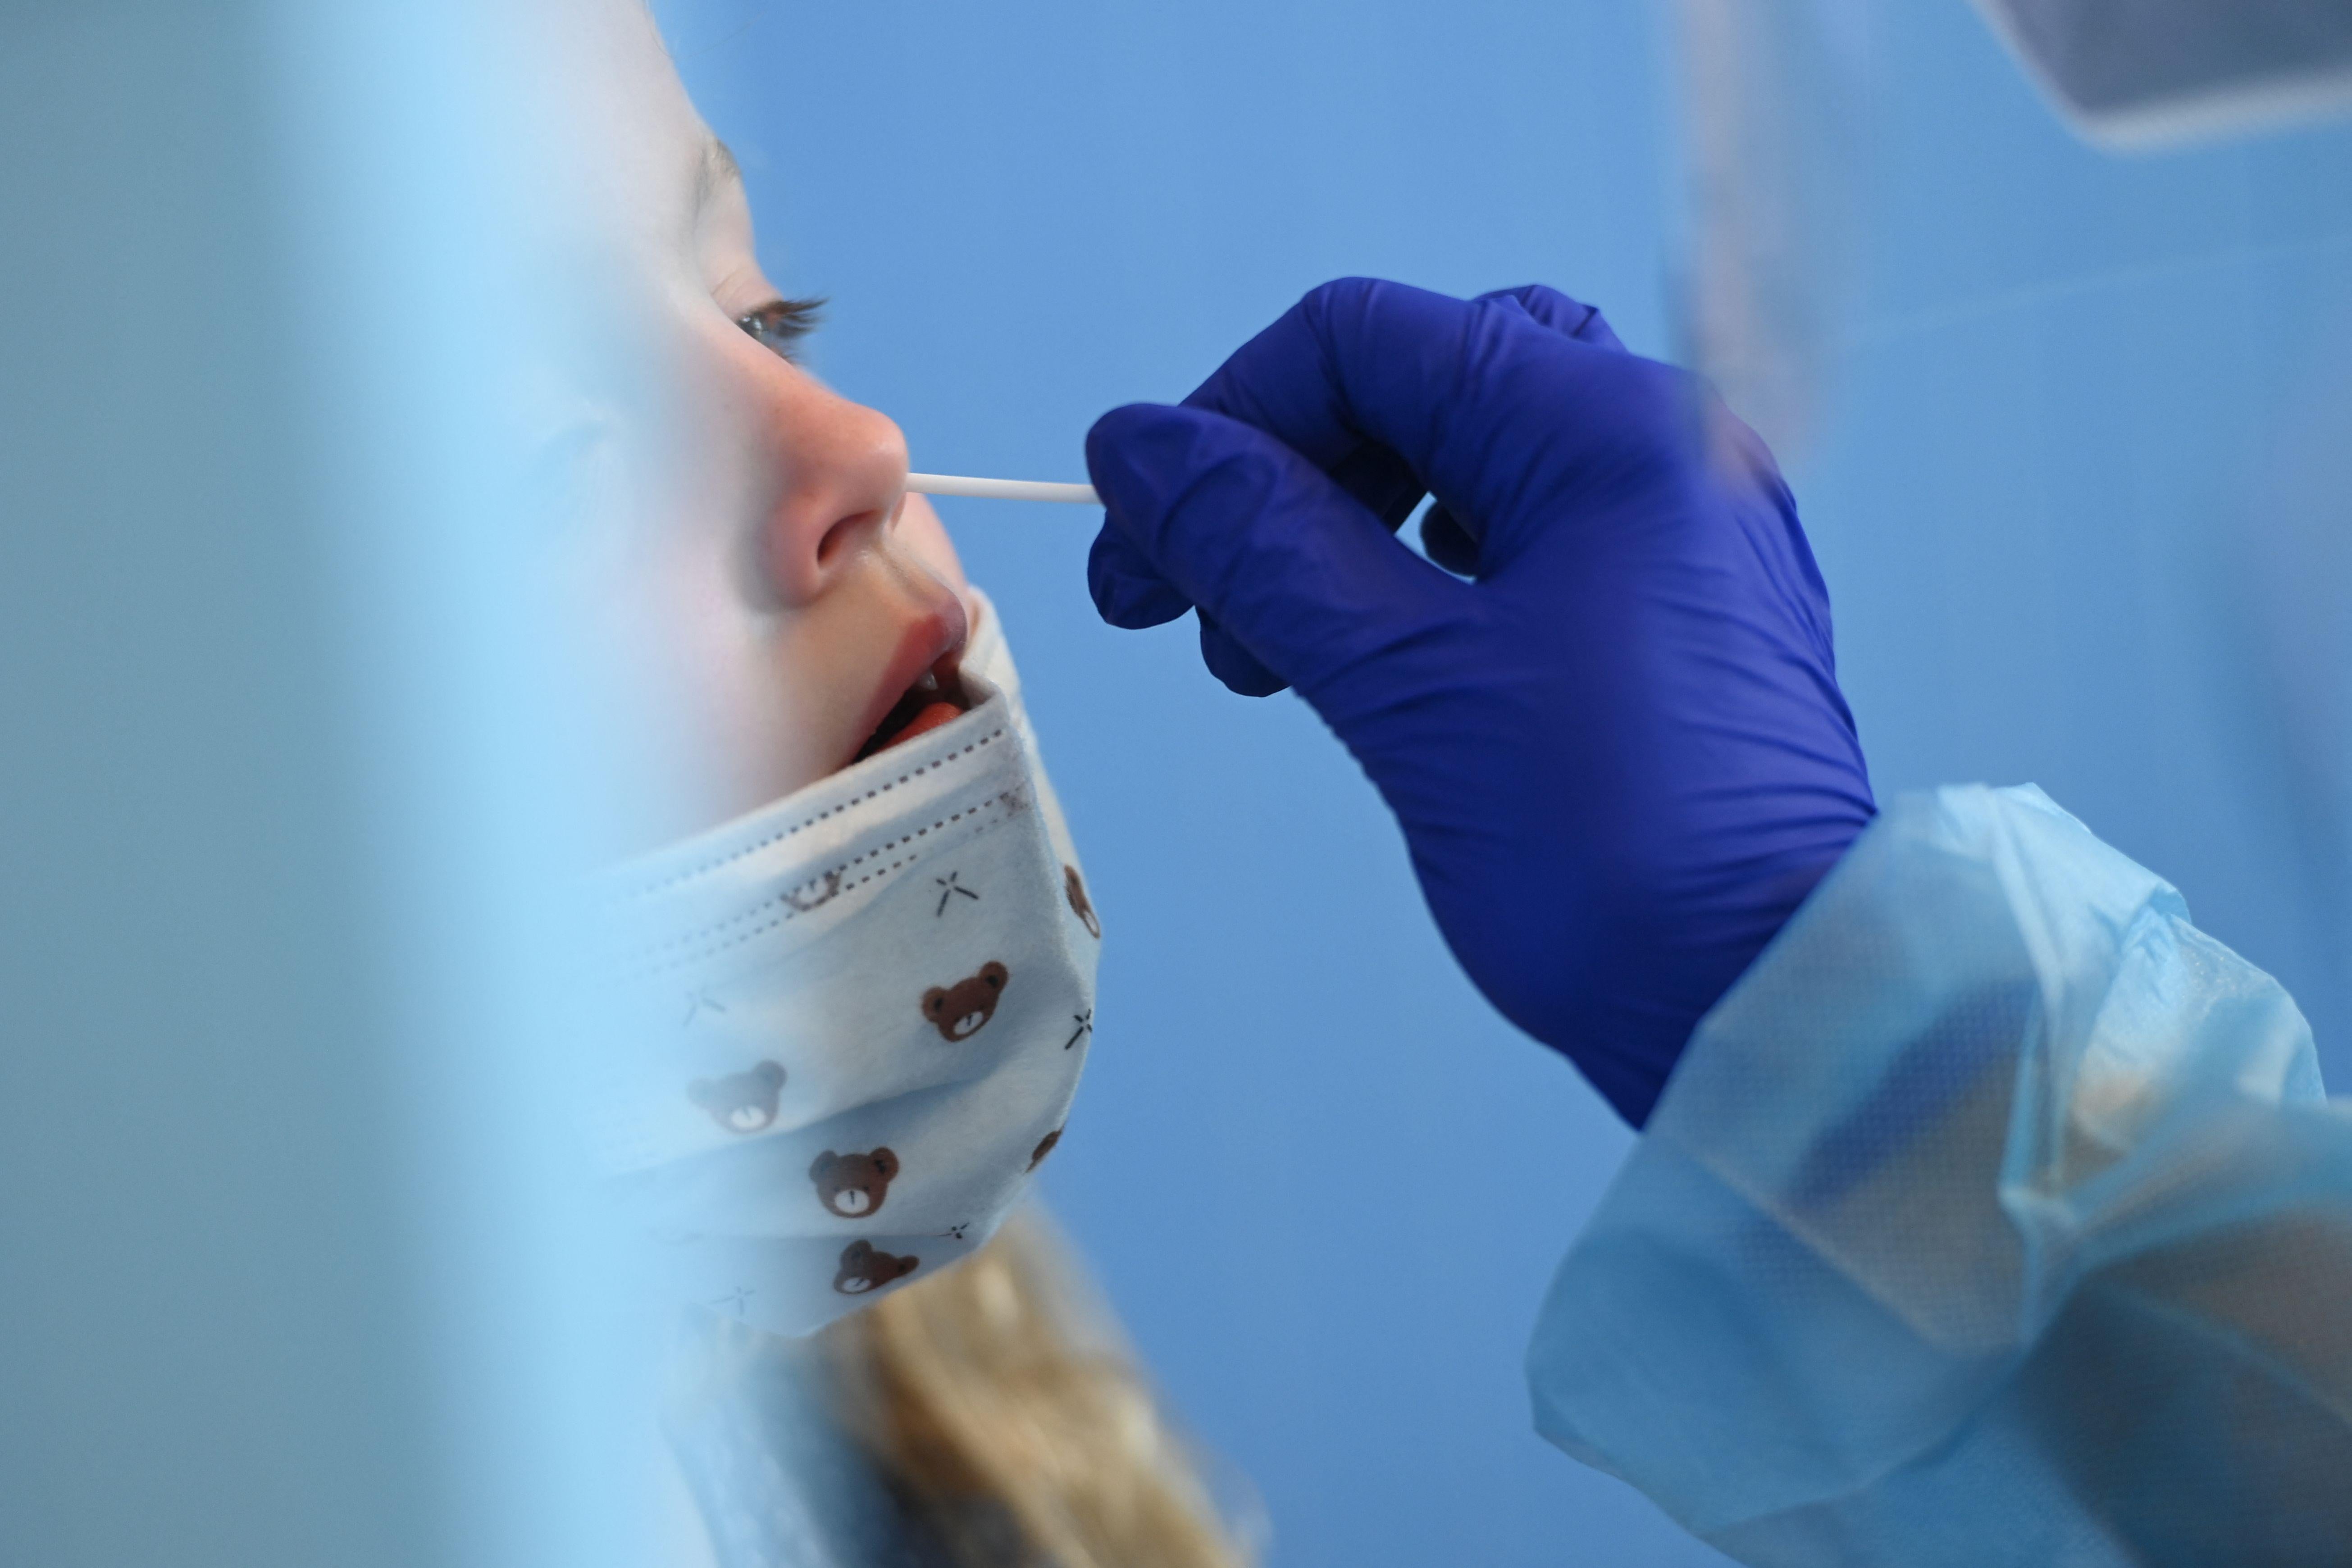 A girl leans her head back as a gloved hand sticks a swab up her nose.